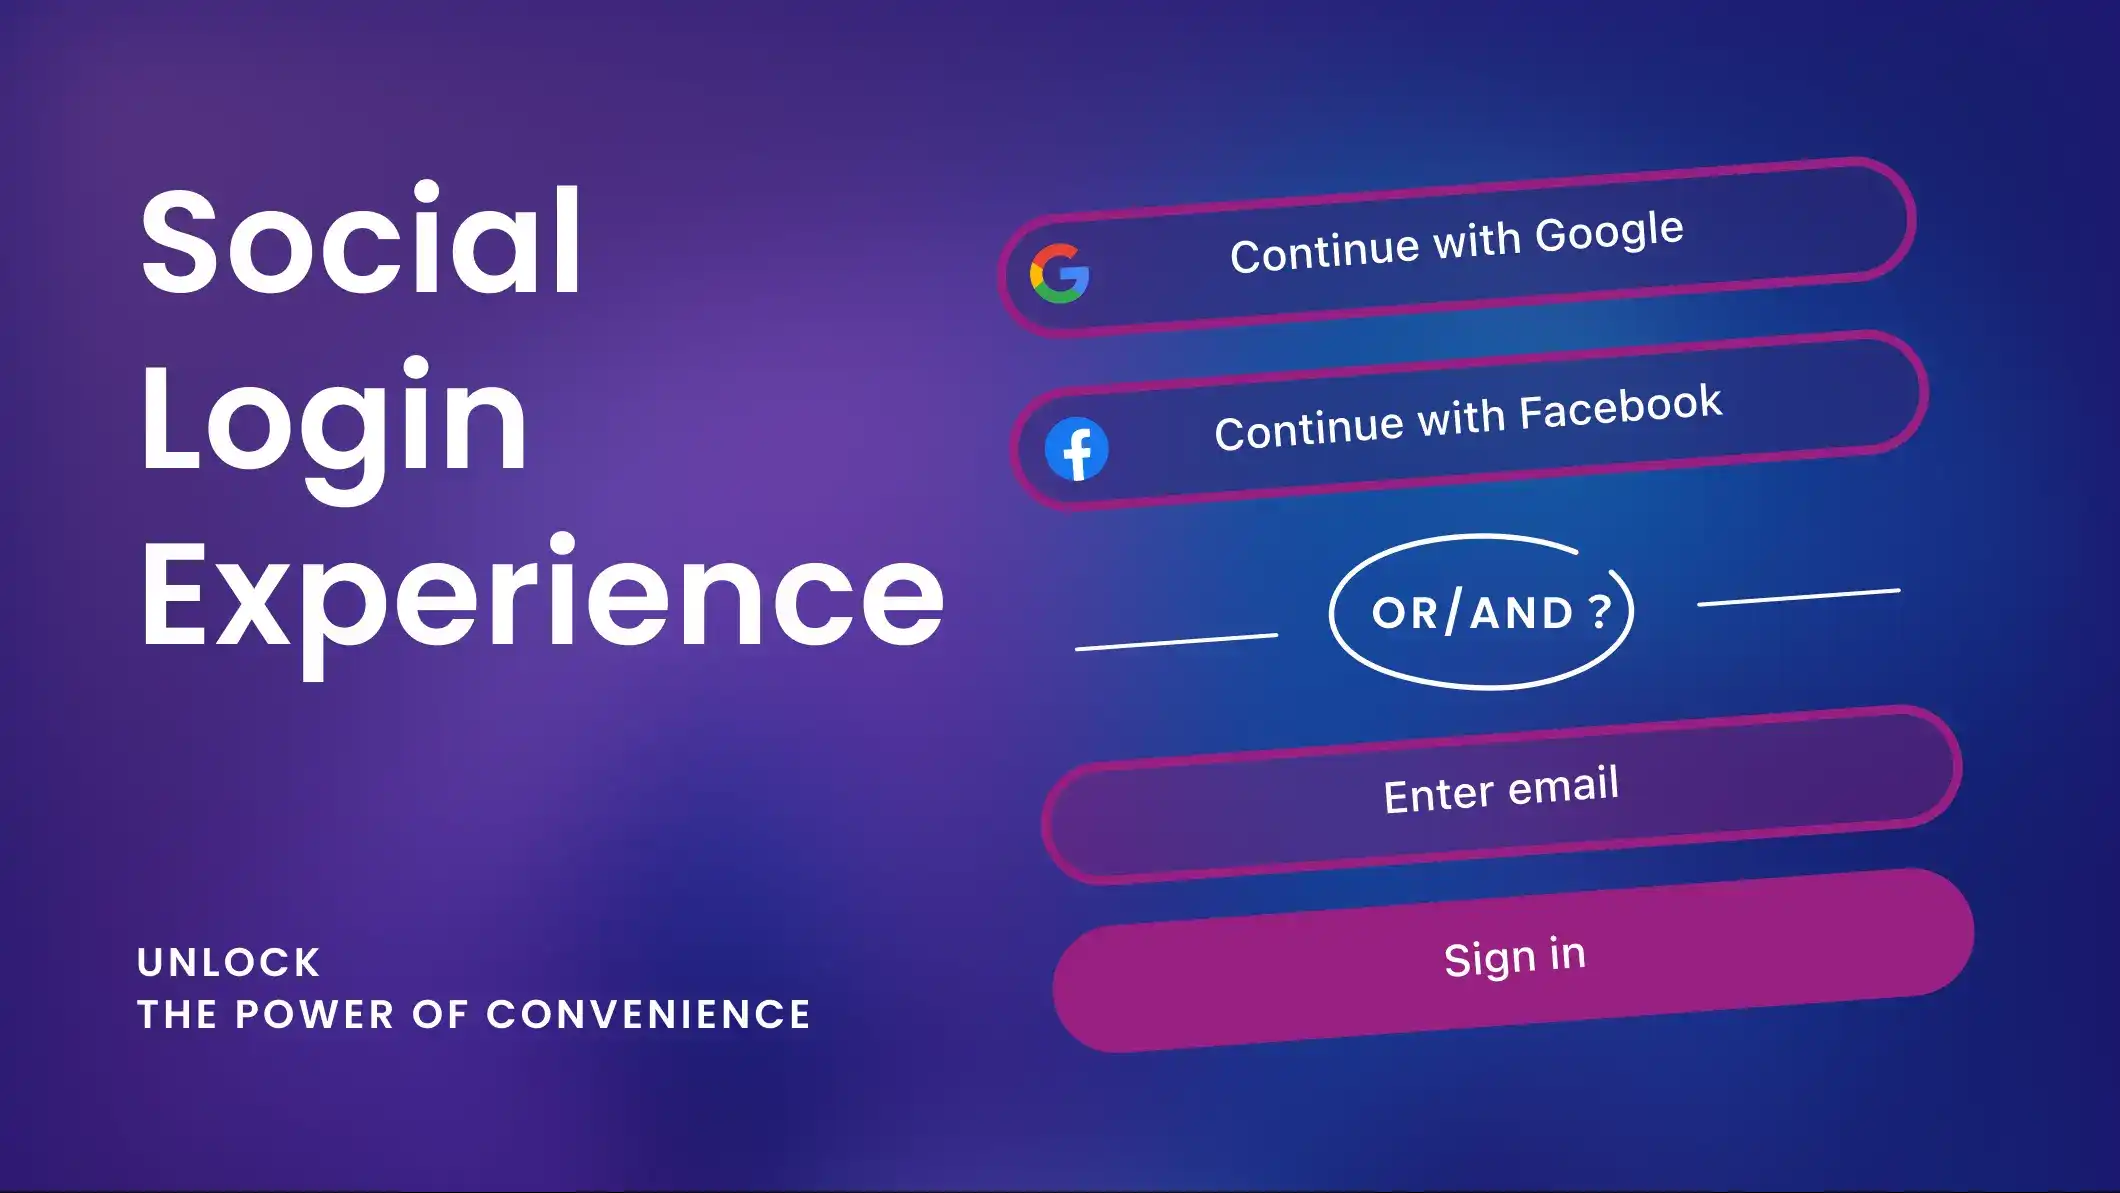 Tackle social login experience: Unlocking the power of convenience